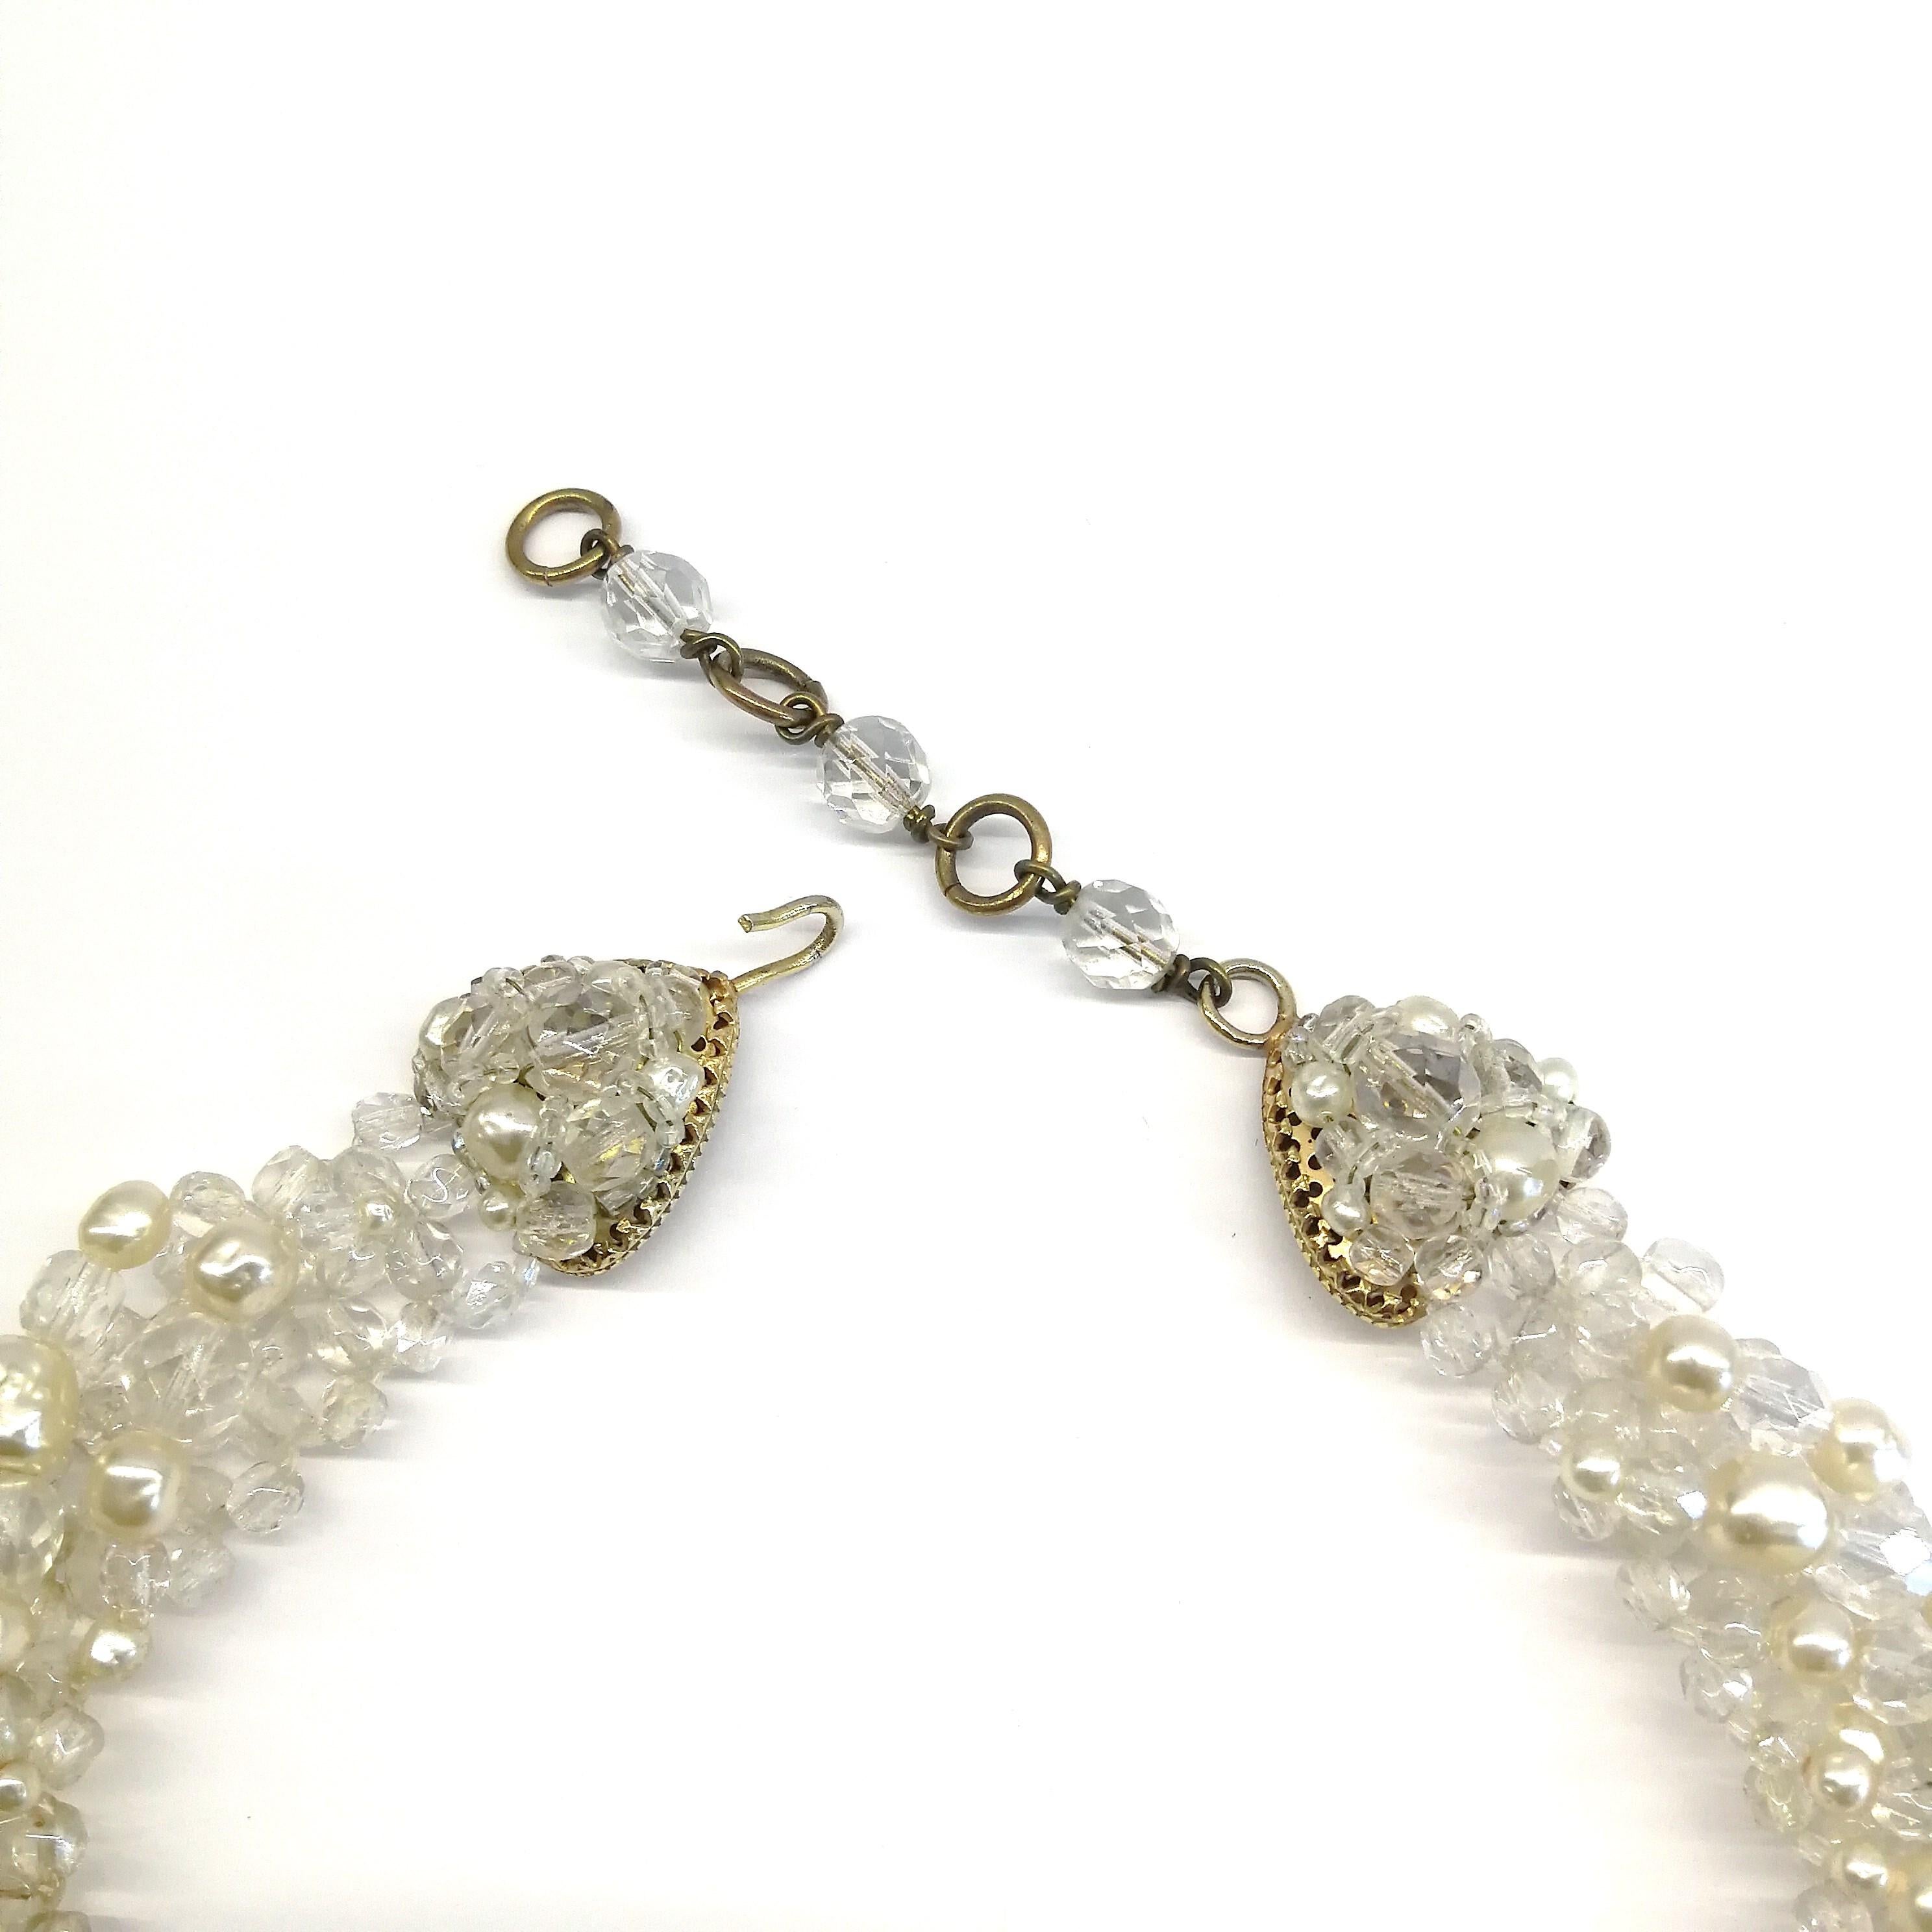 Baroque pearl and half crystal bead necklace and earrings, Coppola e Toppo, 1969 2